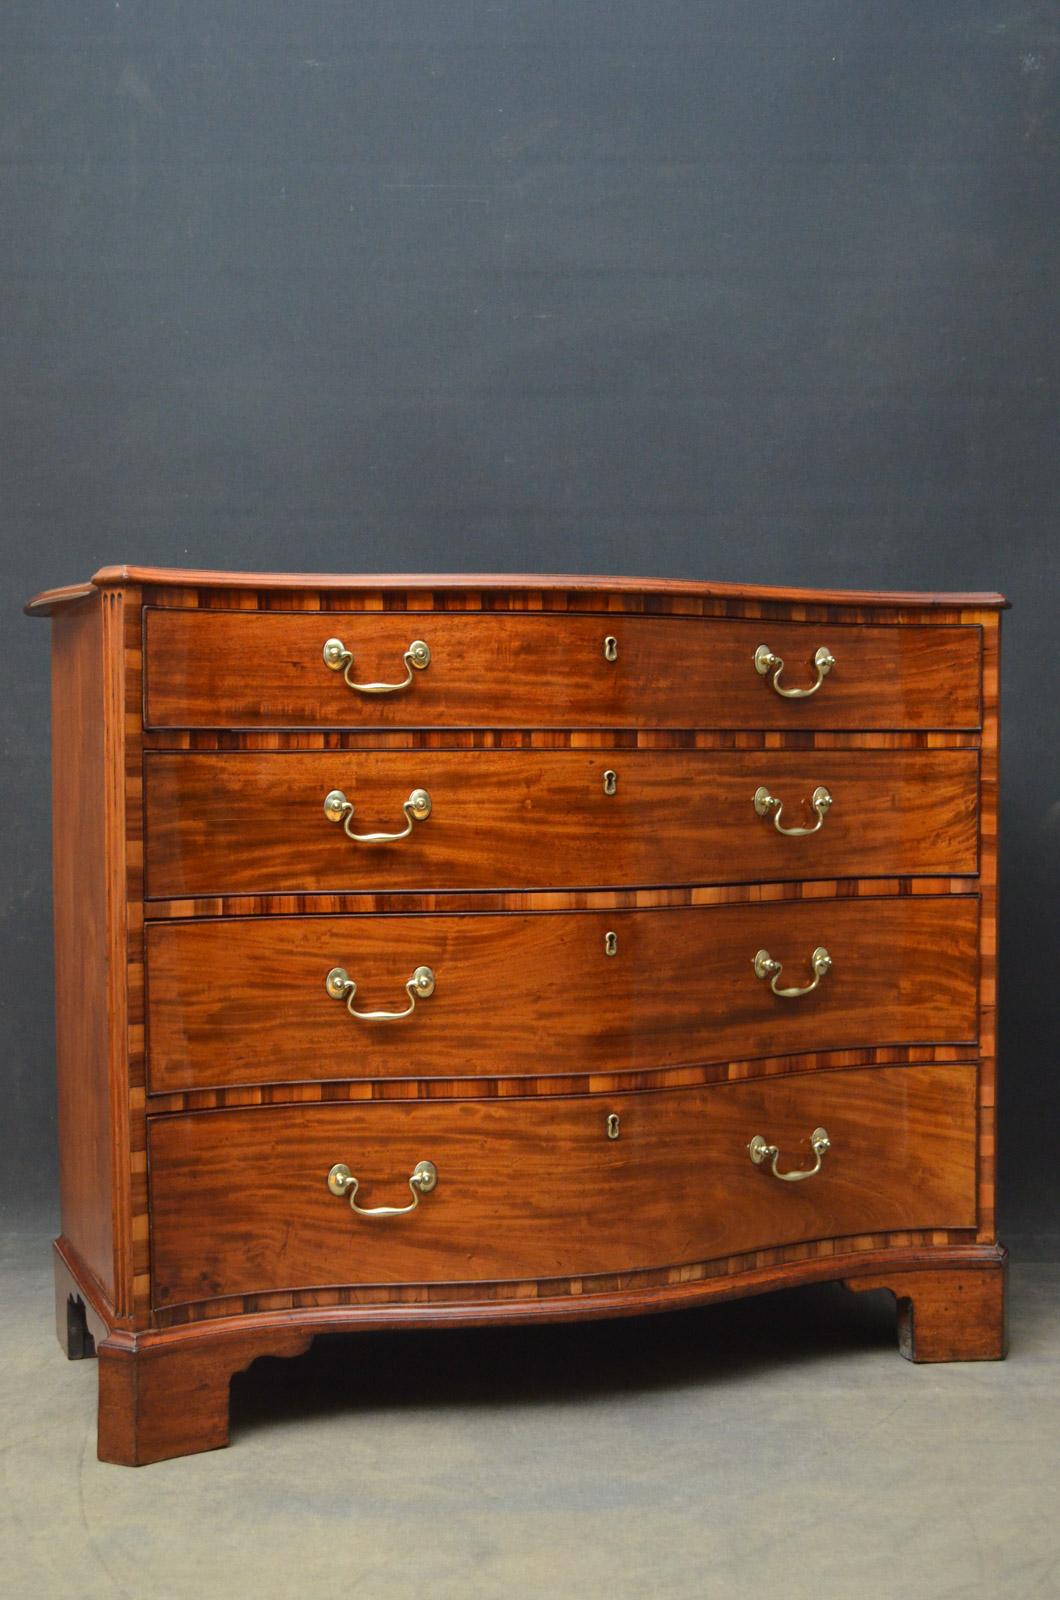 English Fine 18th Century Serpentine Chest of Drawers in Mahogany